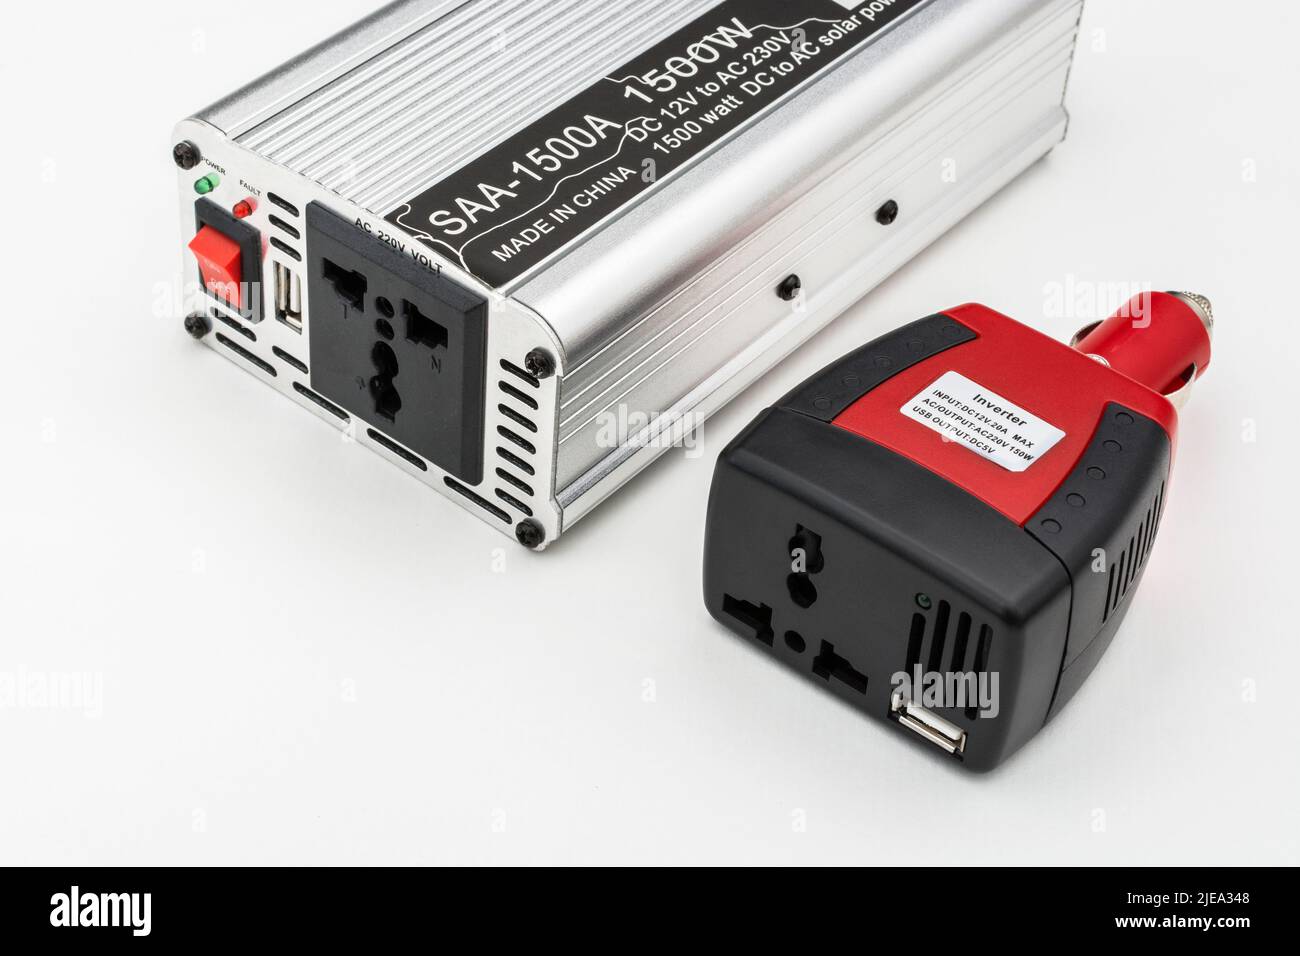 1500w / Watt DC to AC inverter unit made in China (L/H) & small red car  lighter inverter (R/H). Have 3-pin AC power socket + USB charging sockets  Stock Photo - Alamy